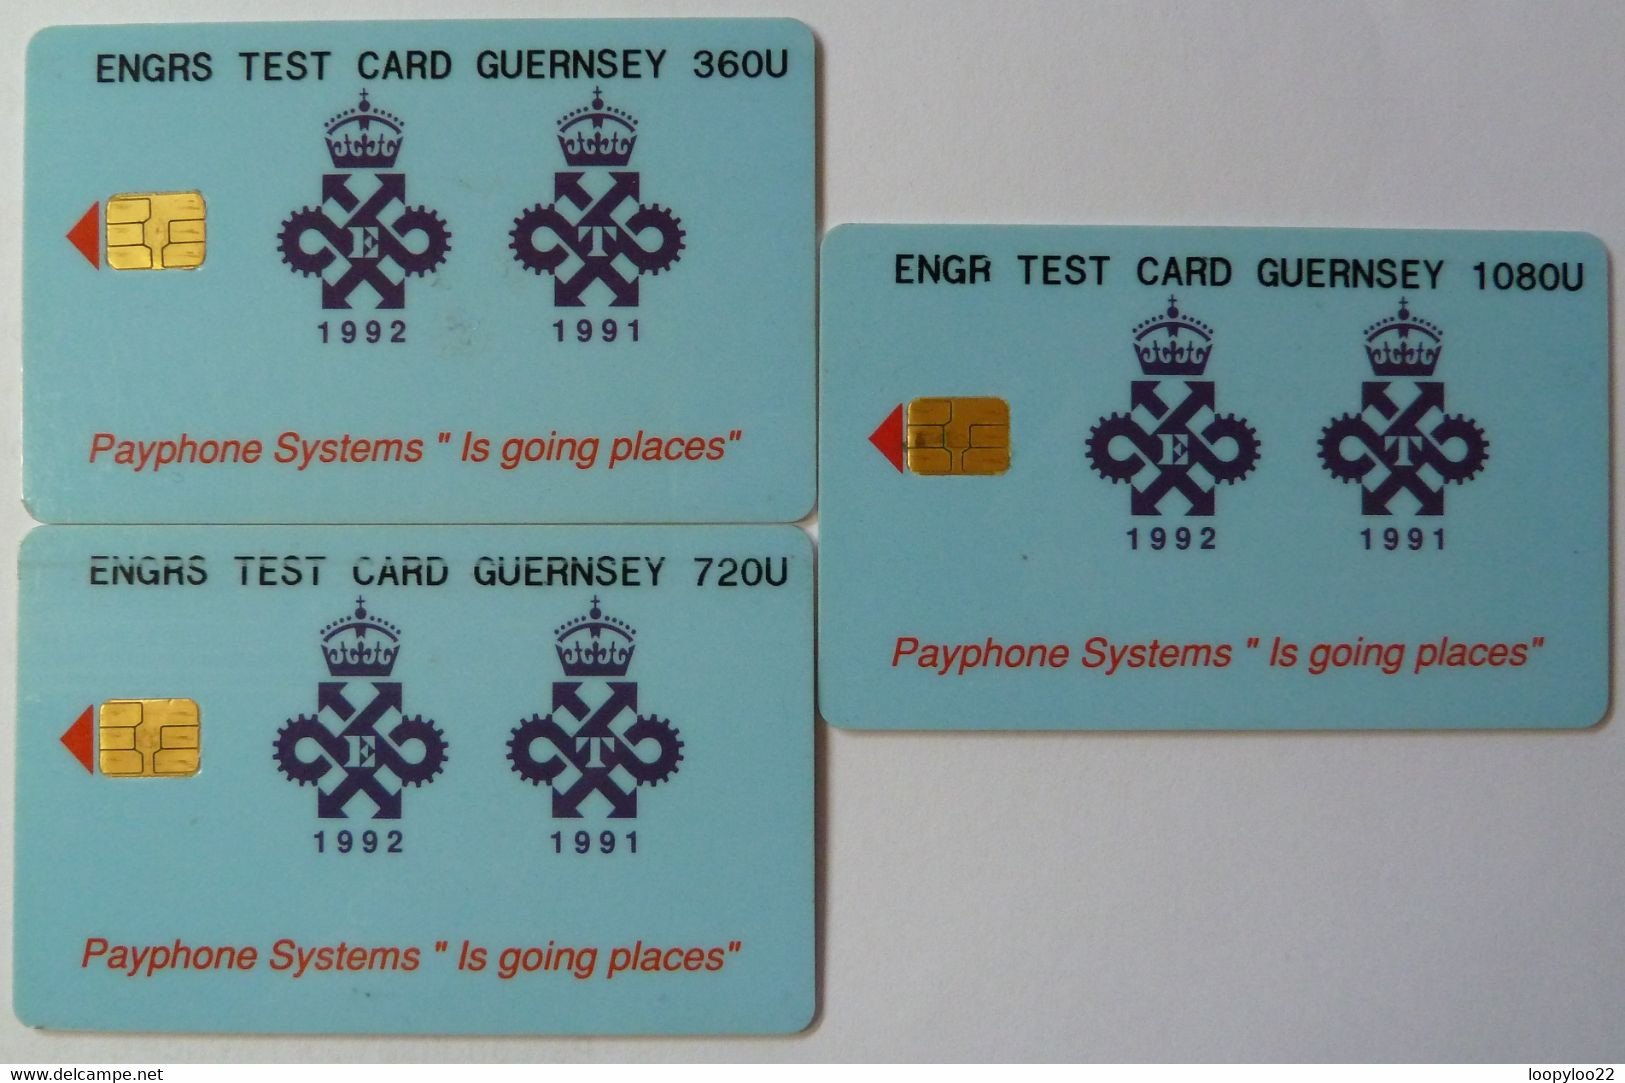 Guernsey - UK - GPT - Queens Award - Set of 3 - ENGINEER TEST - 360, 720 & 1080 Units - Used